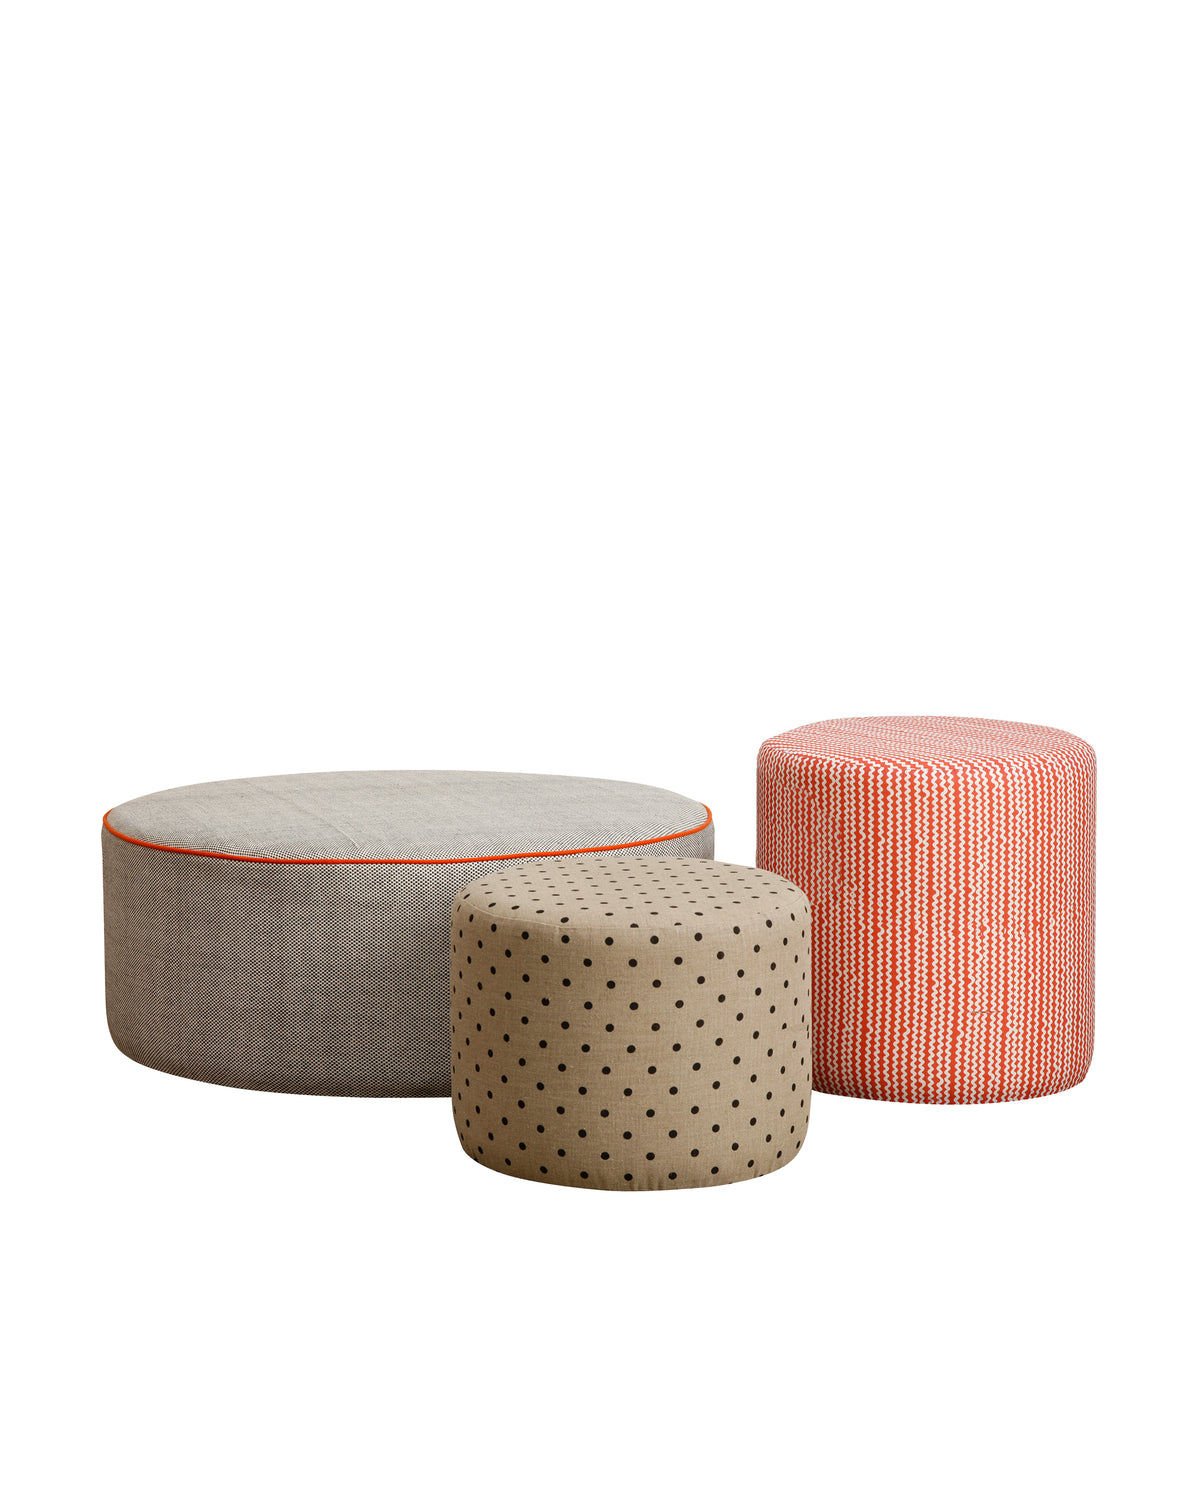 Made to order, these stylish round ottomans are perfect for your kids' bedrooms, learning spaces and toy rooms.      Our upholstered ottomans are designed and made in Australia. The small and large ottomans are the perfect complement together as they sit at the same height. The medium size is a perfect stool height. 